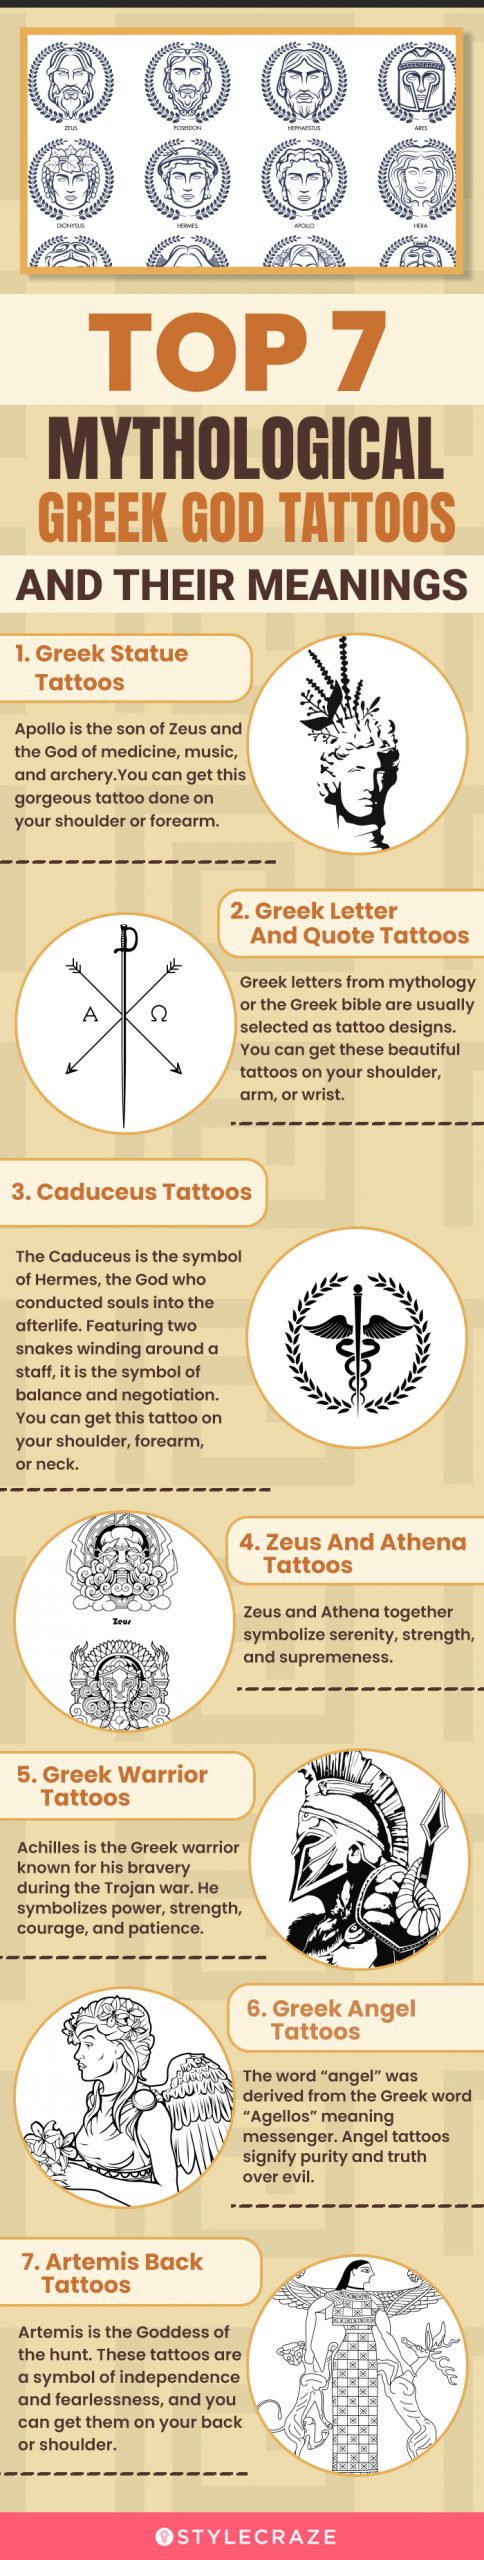 top 7 mythological greek god tattoos and their meanings (infographic)